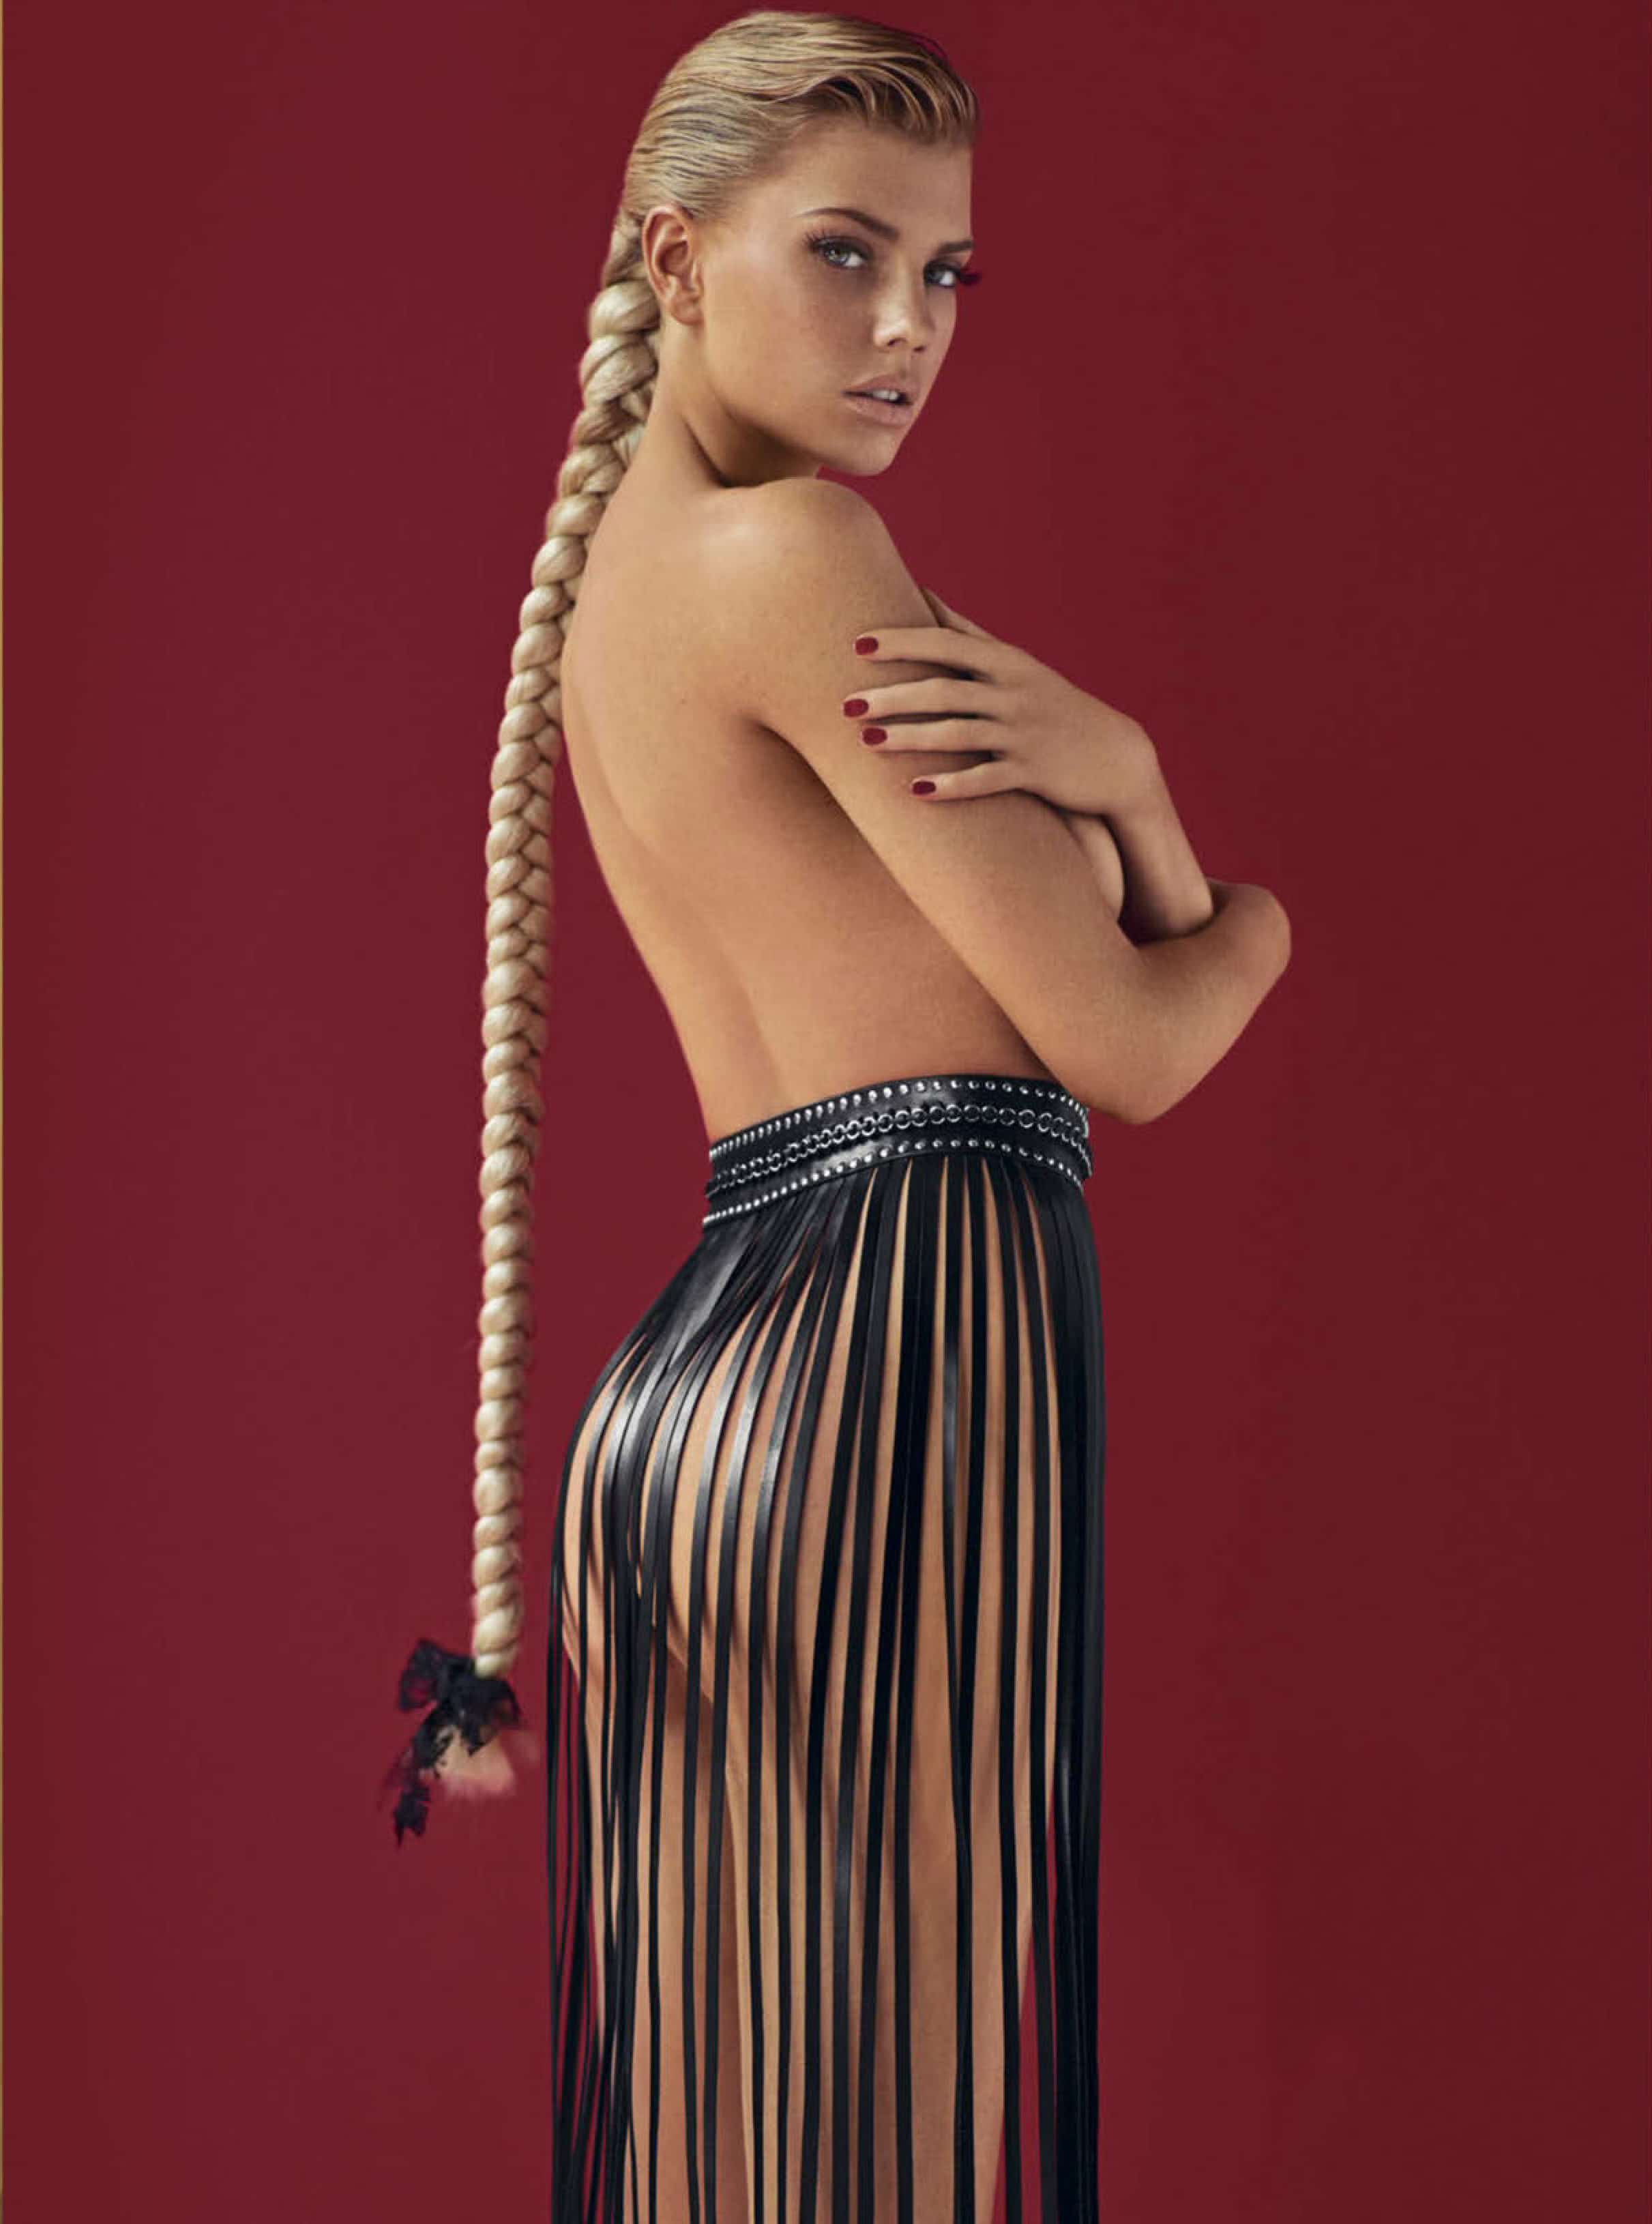 model charlotte mckinney poses topless with long braid for gq mexico